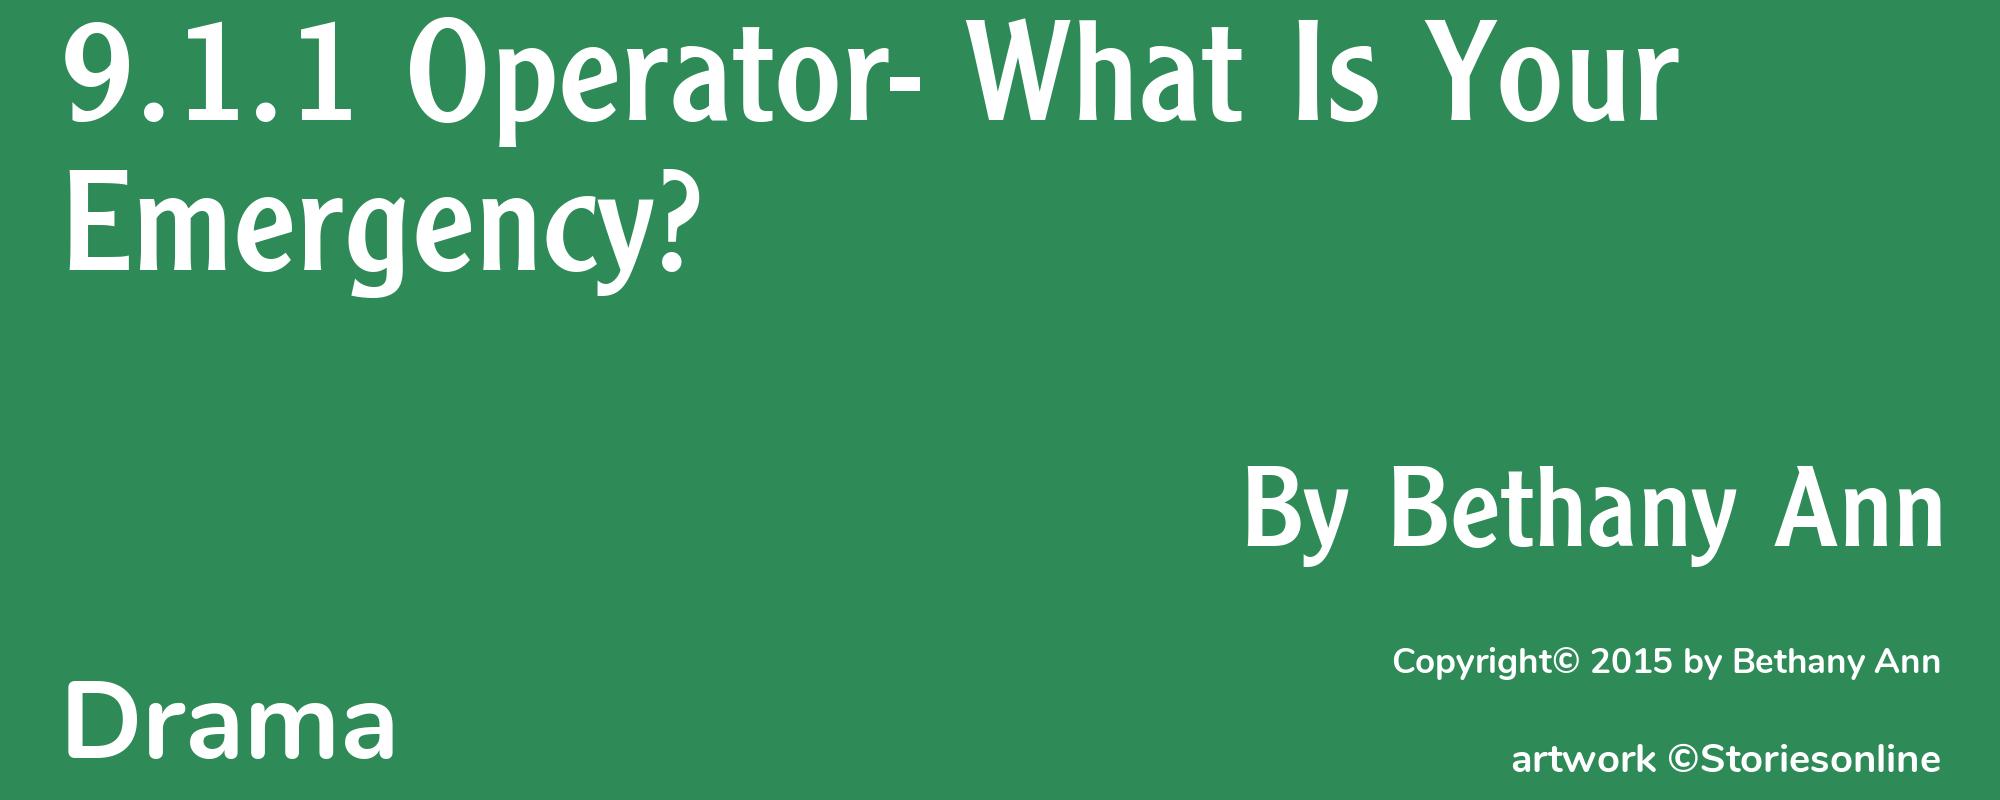 9.1.1 Operator- What Is Your Emergency? - Cover